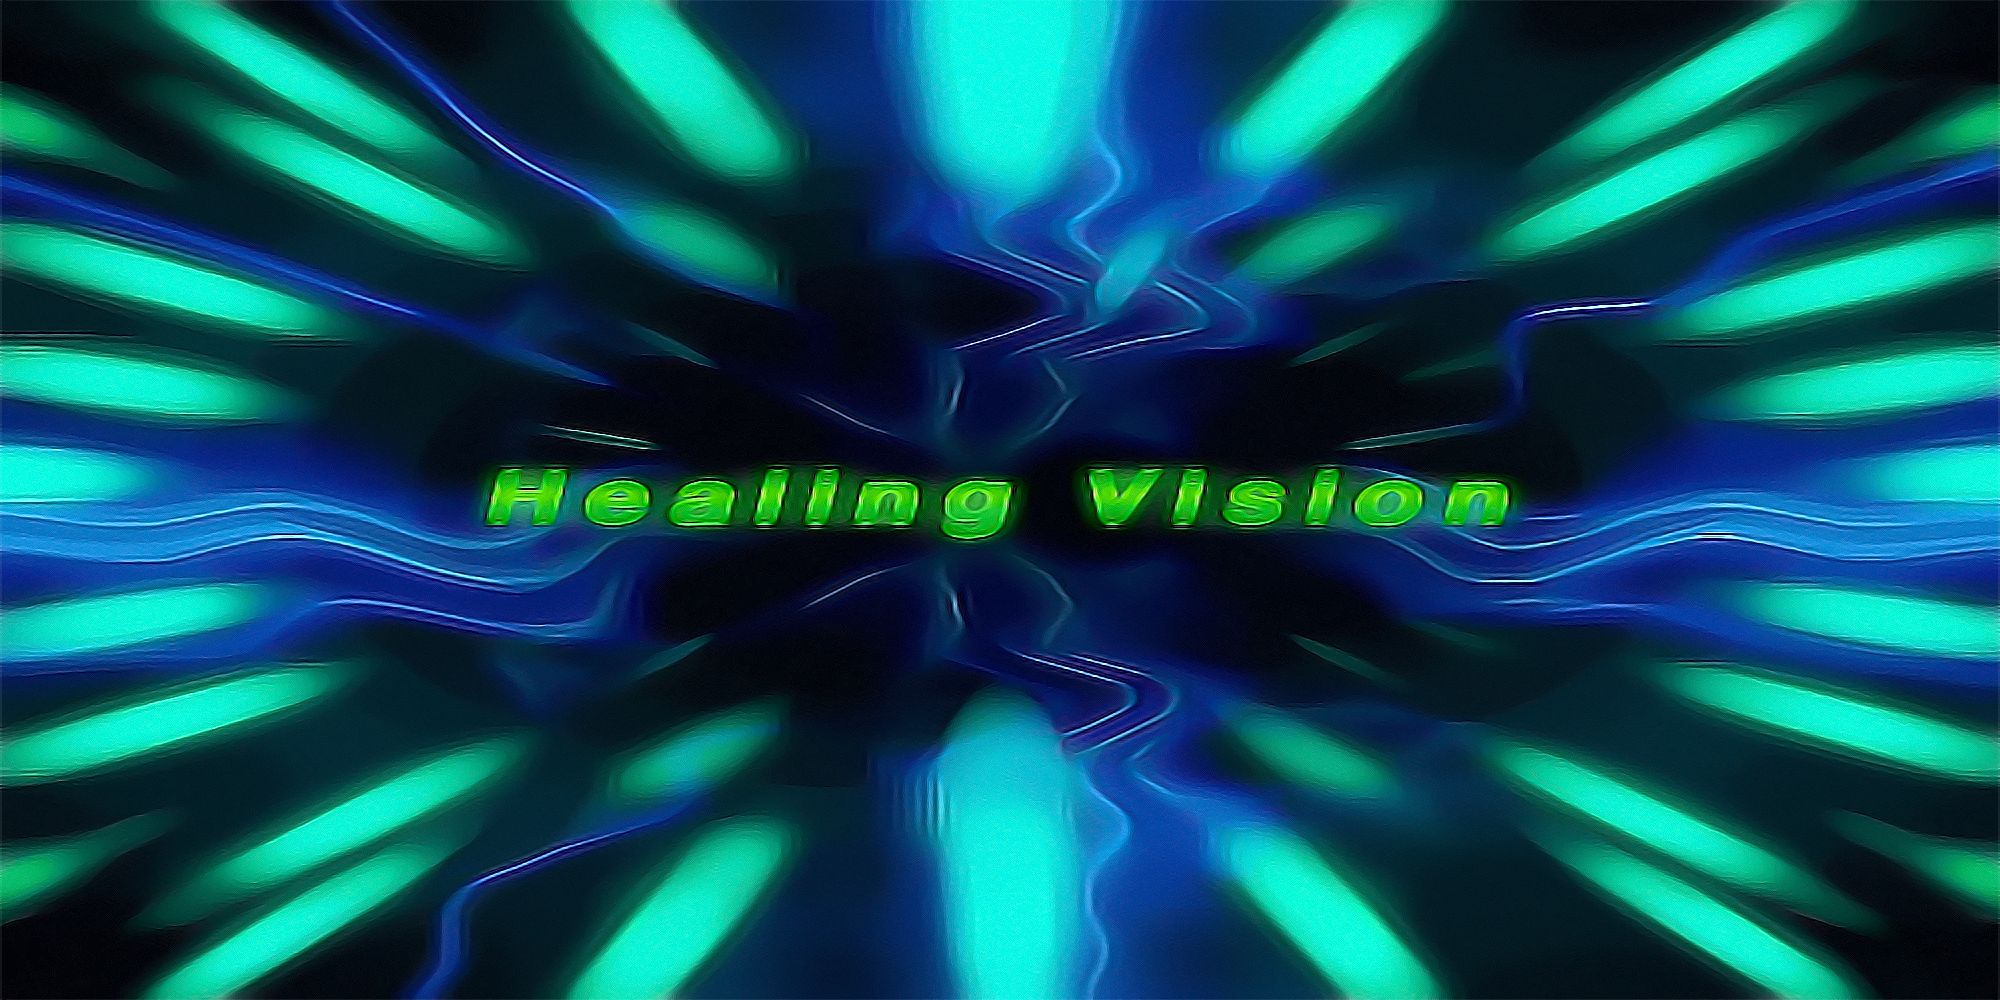 A pulsating green and blue background for the track, Healing Vision, from Dance Dance Revolution 5th Mix.